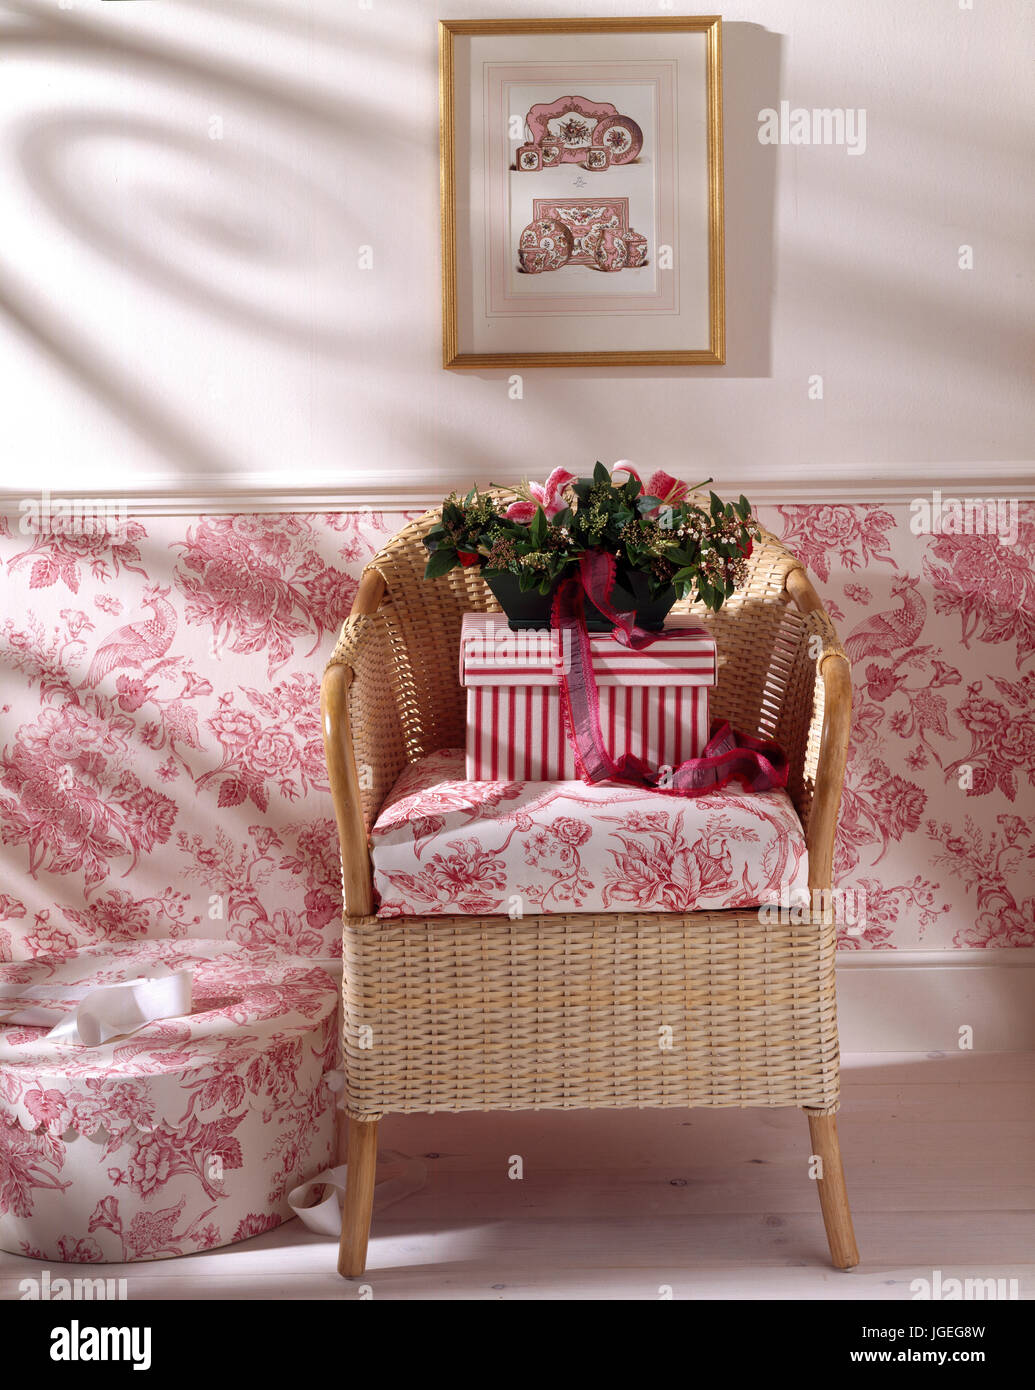 Cane chair with fabric cushion to match below dado wall covering Stock Photo